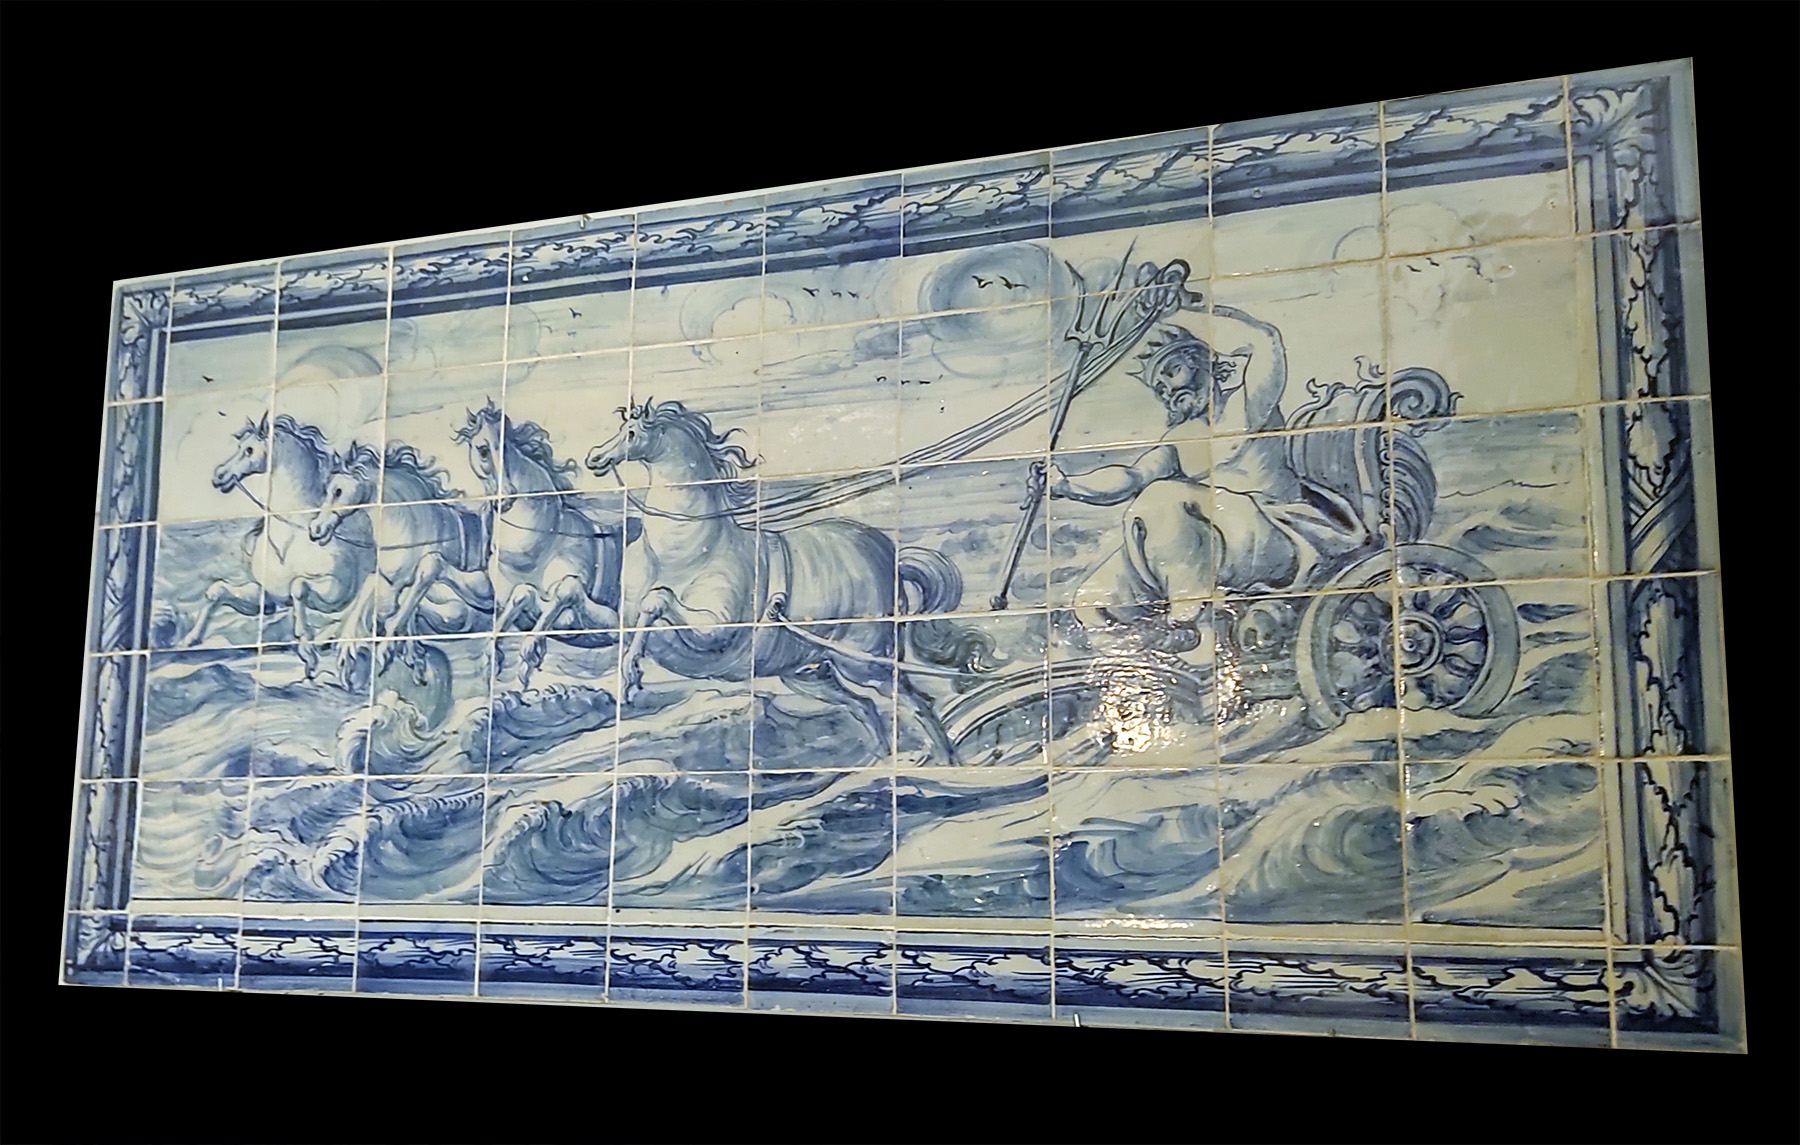 Portuguese, Baroque period, blue and white painted tile (azulejos) mural